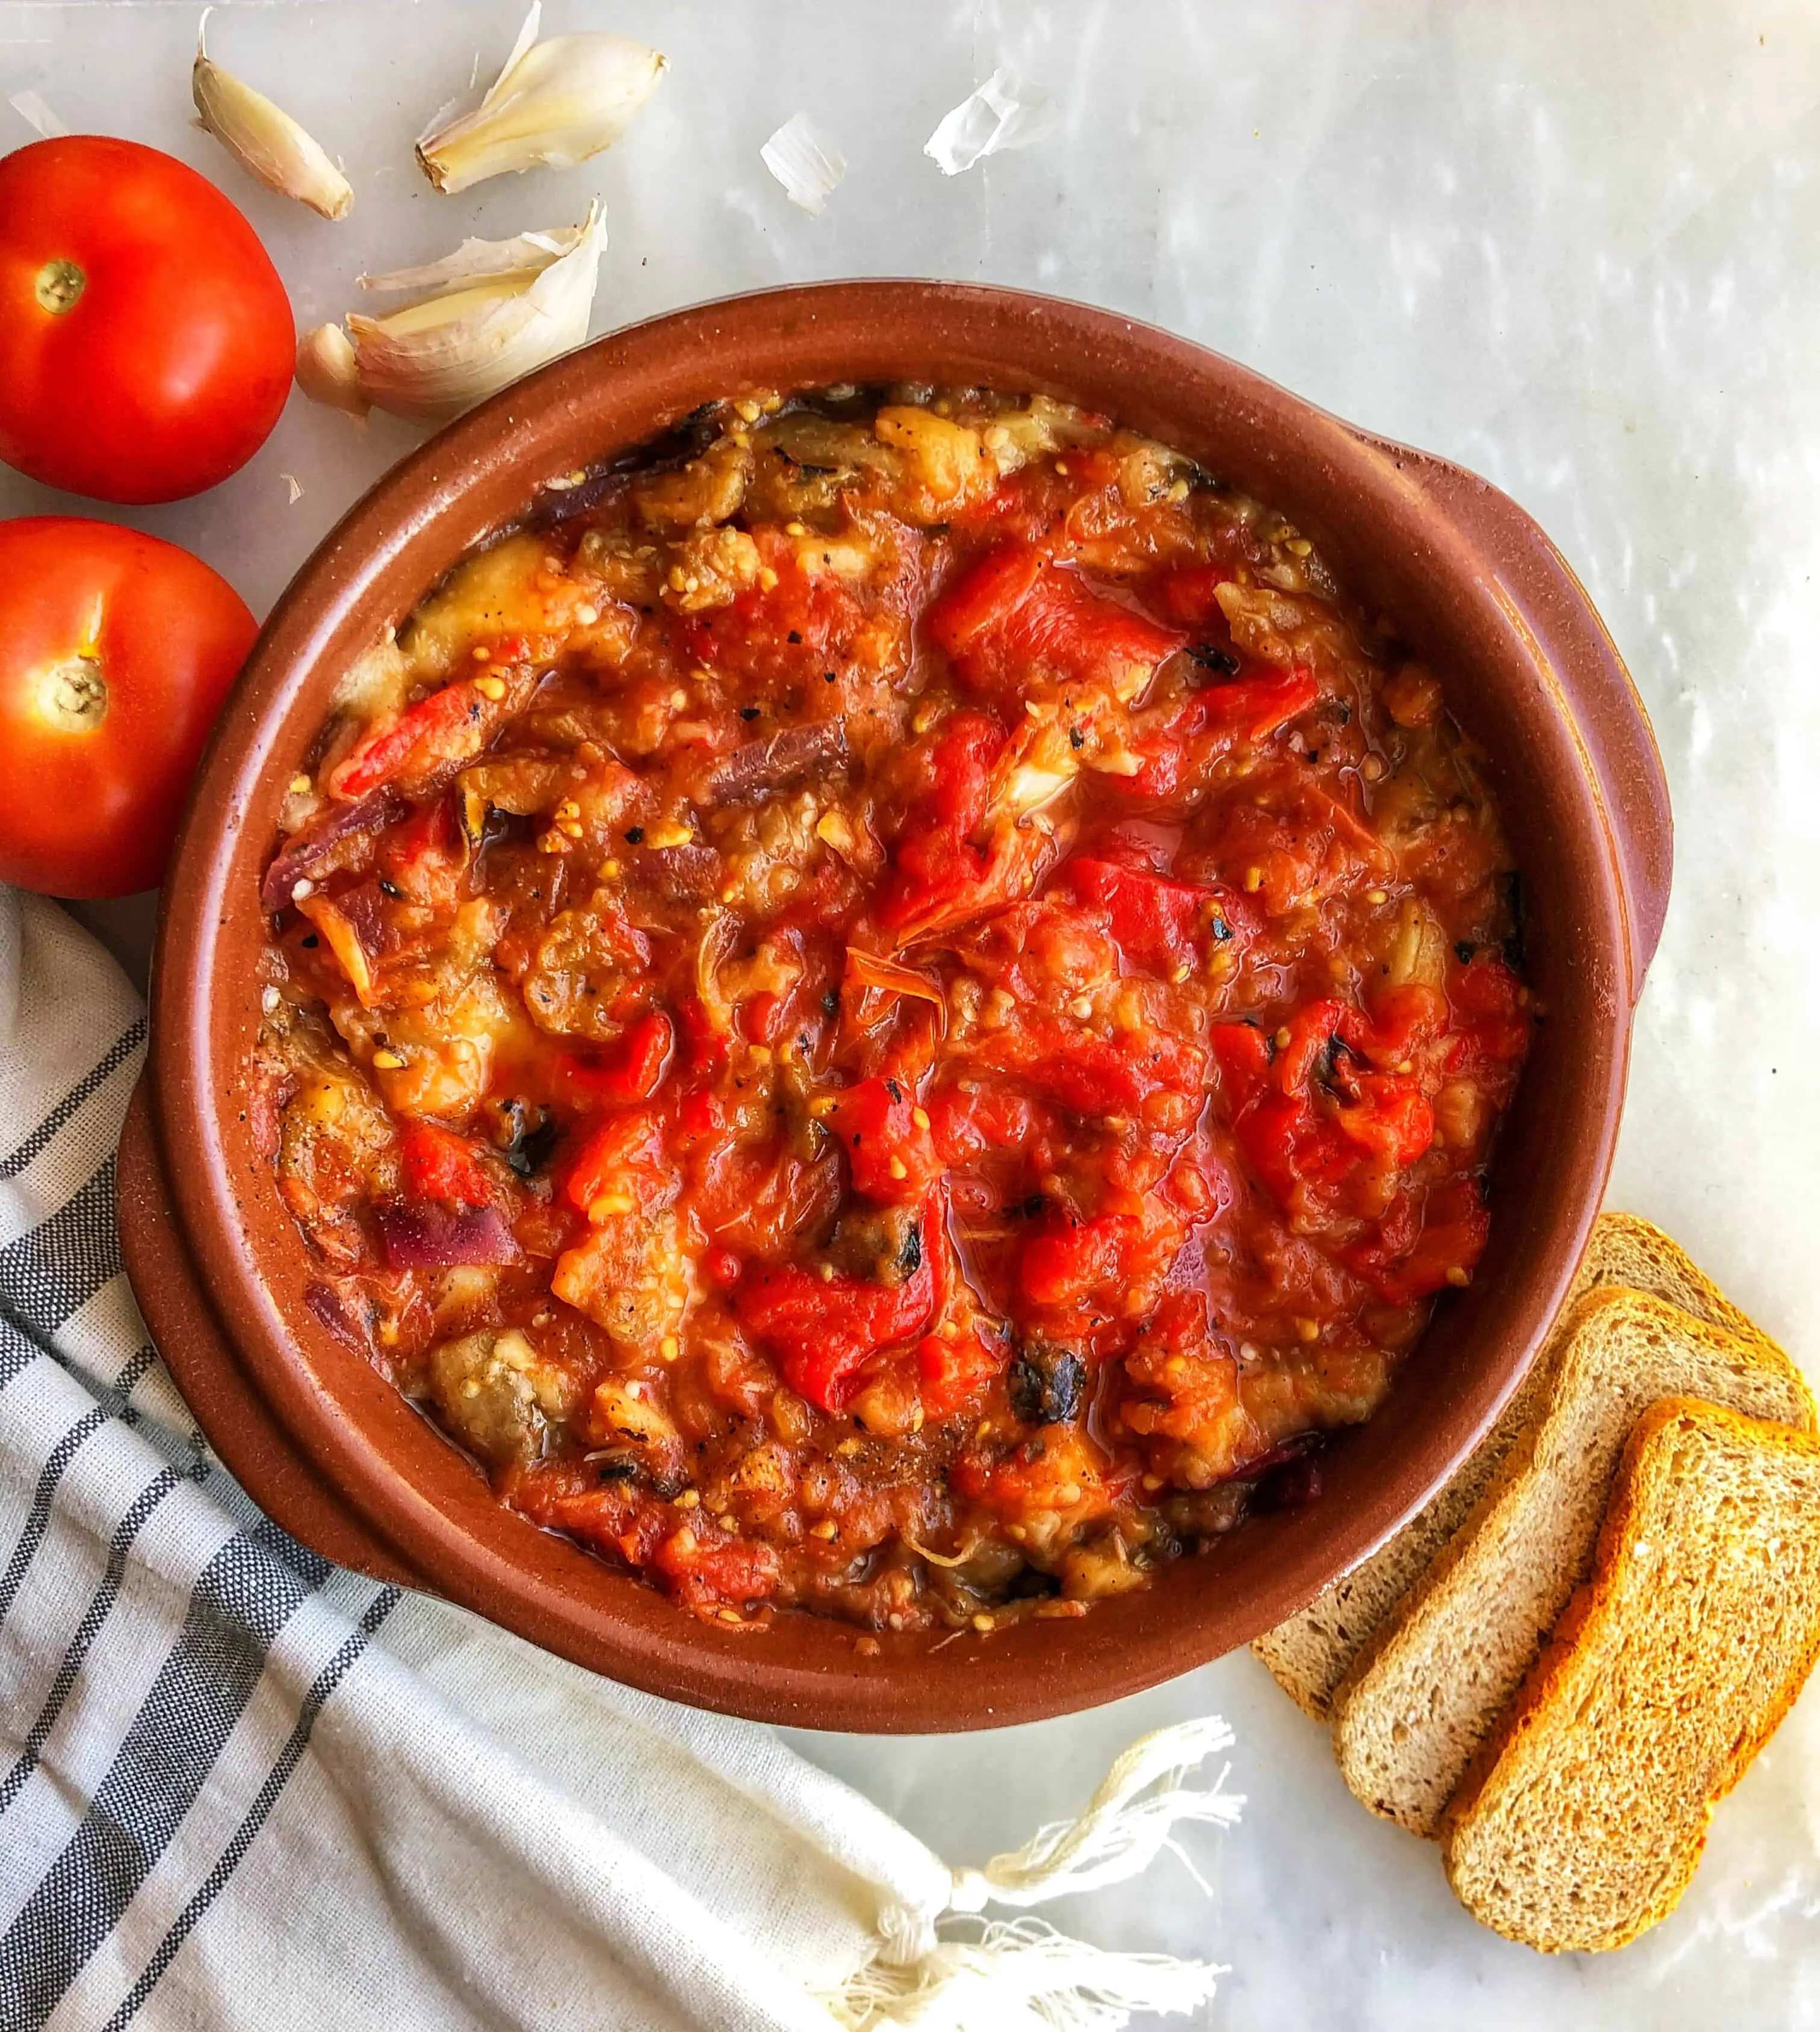 patlican soslu (eggplant & tomato dip) with a side of bread